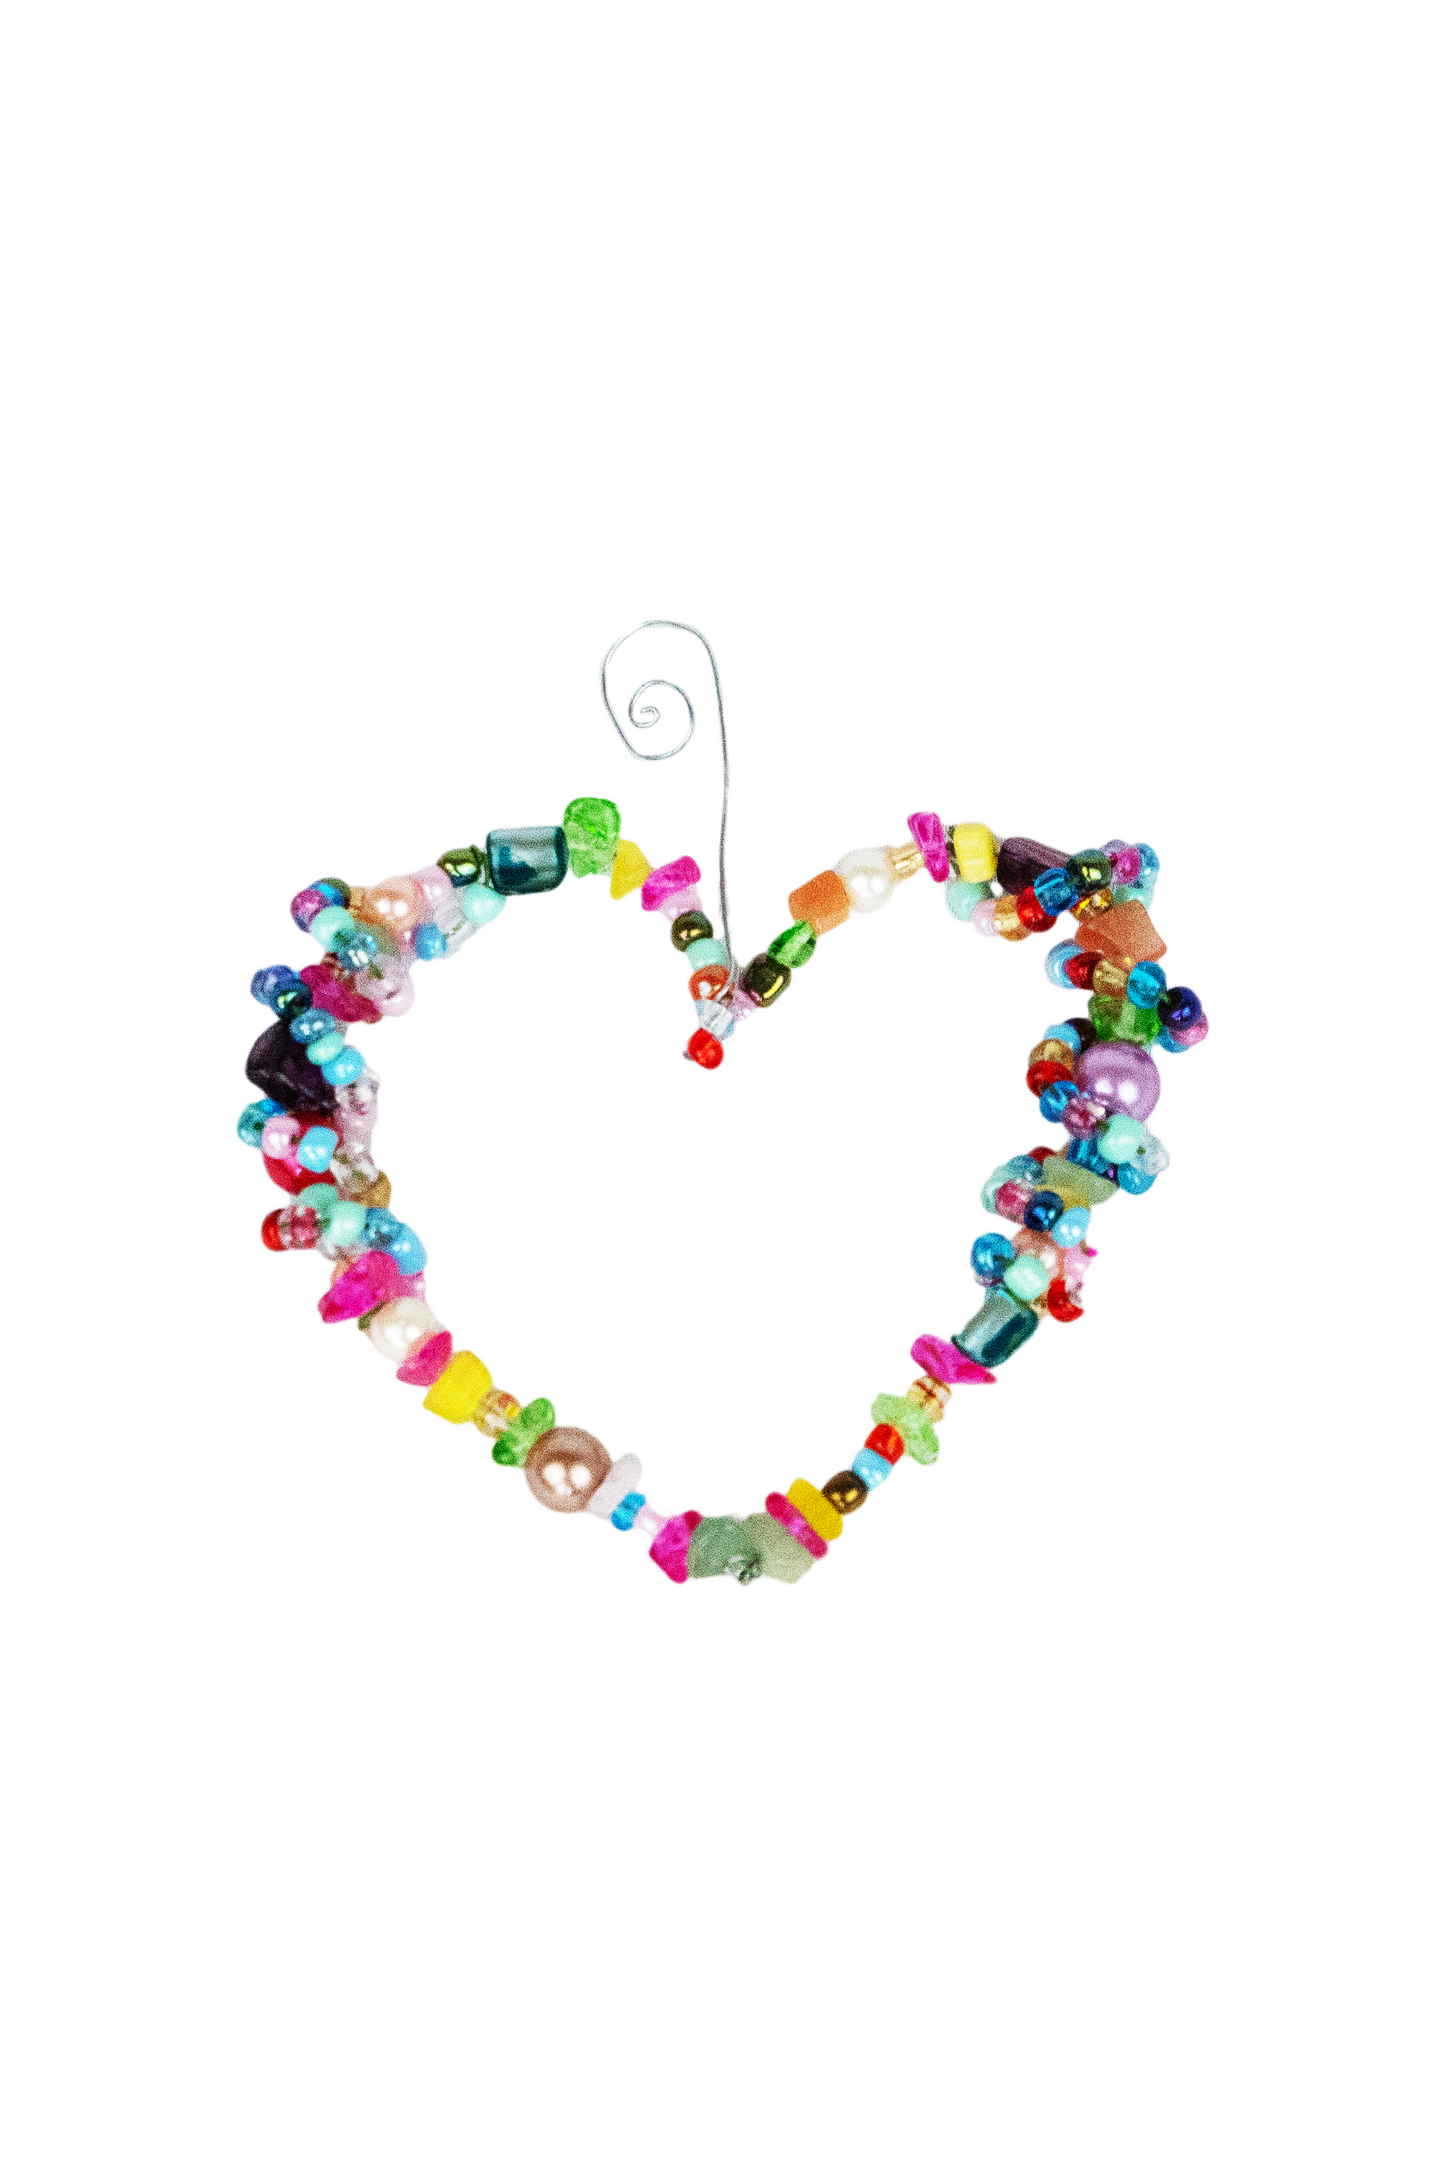 Colorful Beaded Heart Ornament